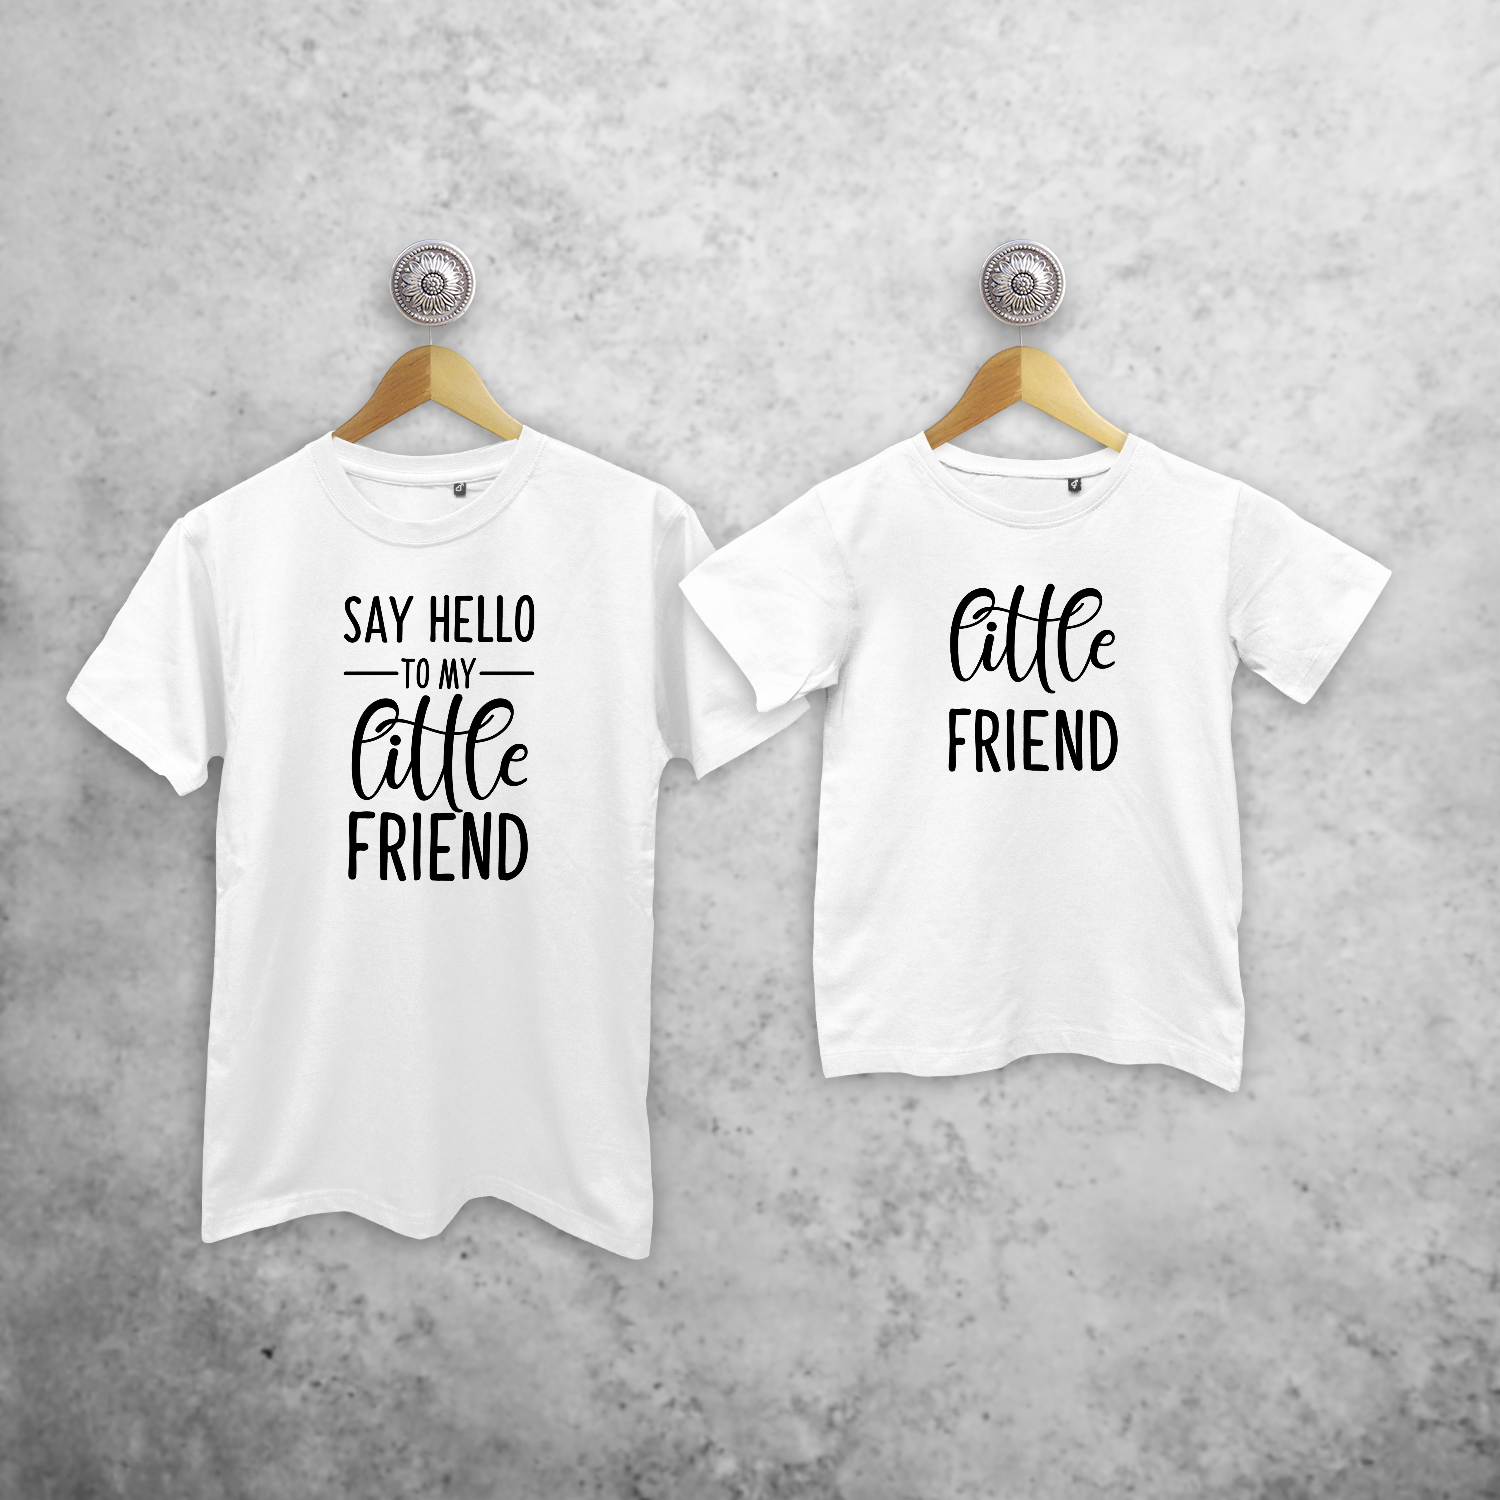 'Say hello to my little friend' & 'Little friend' matching shirts